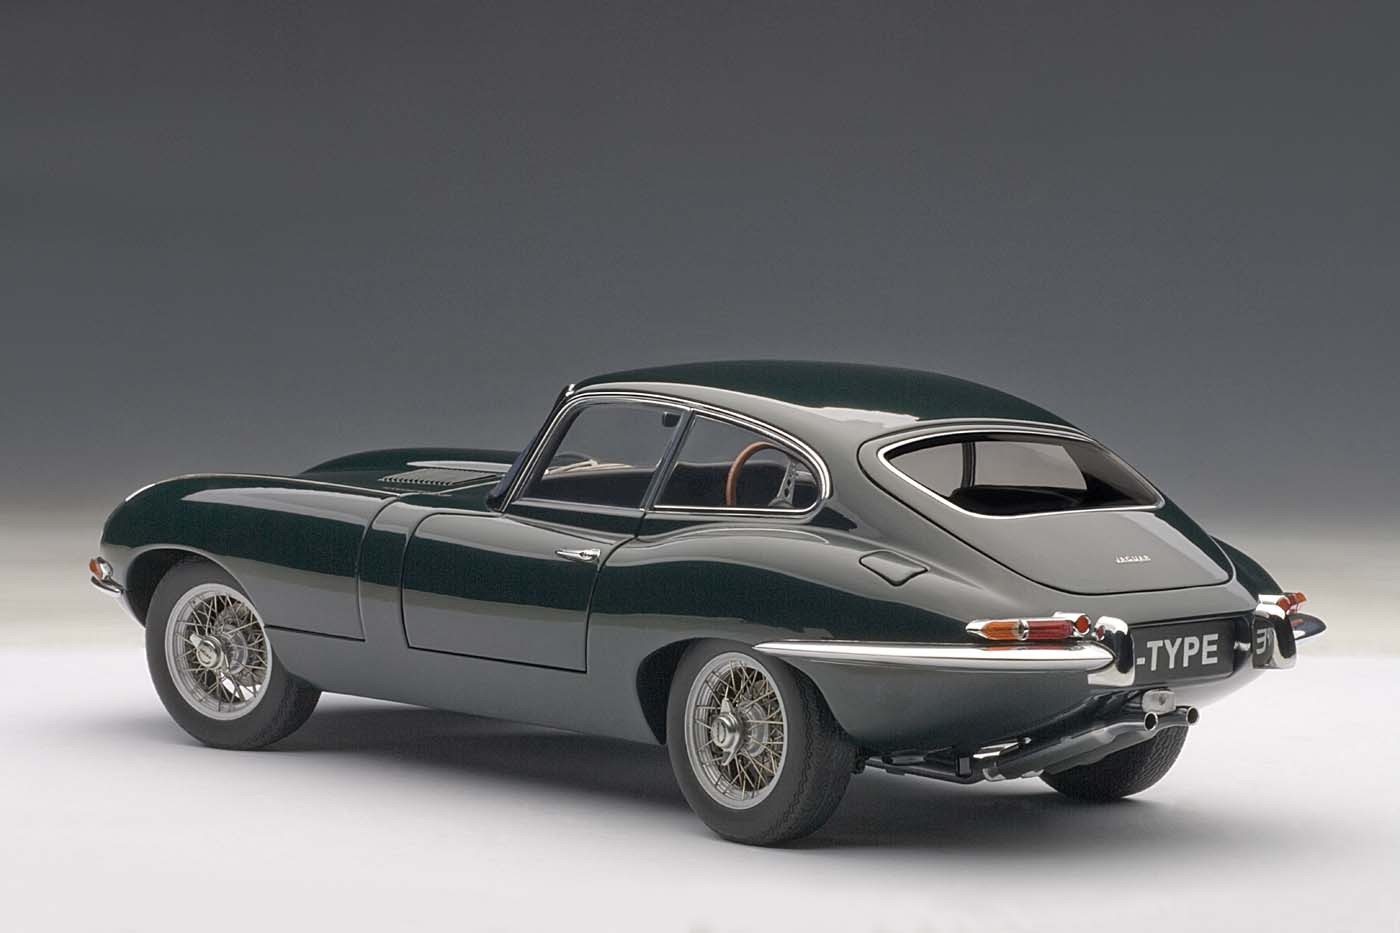 Jaguar E-Type Coupe Series 1 3.8, Green, with Metal Wire-Spoke